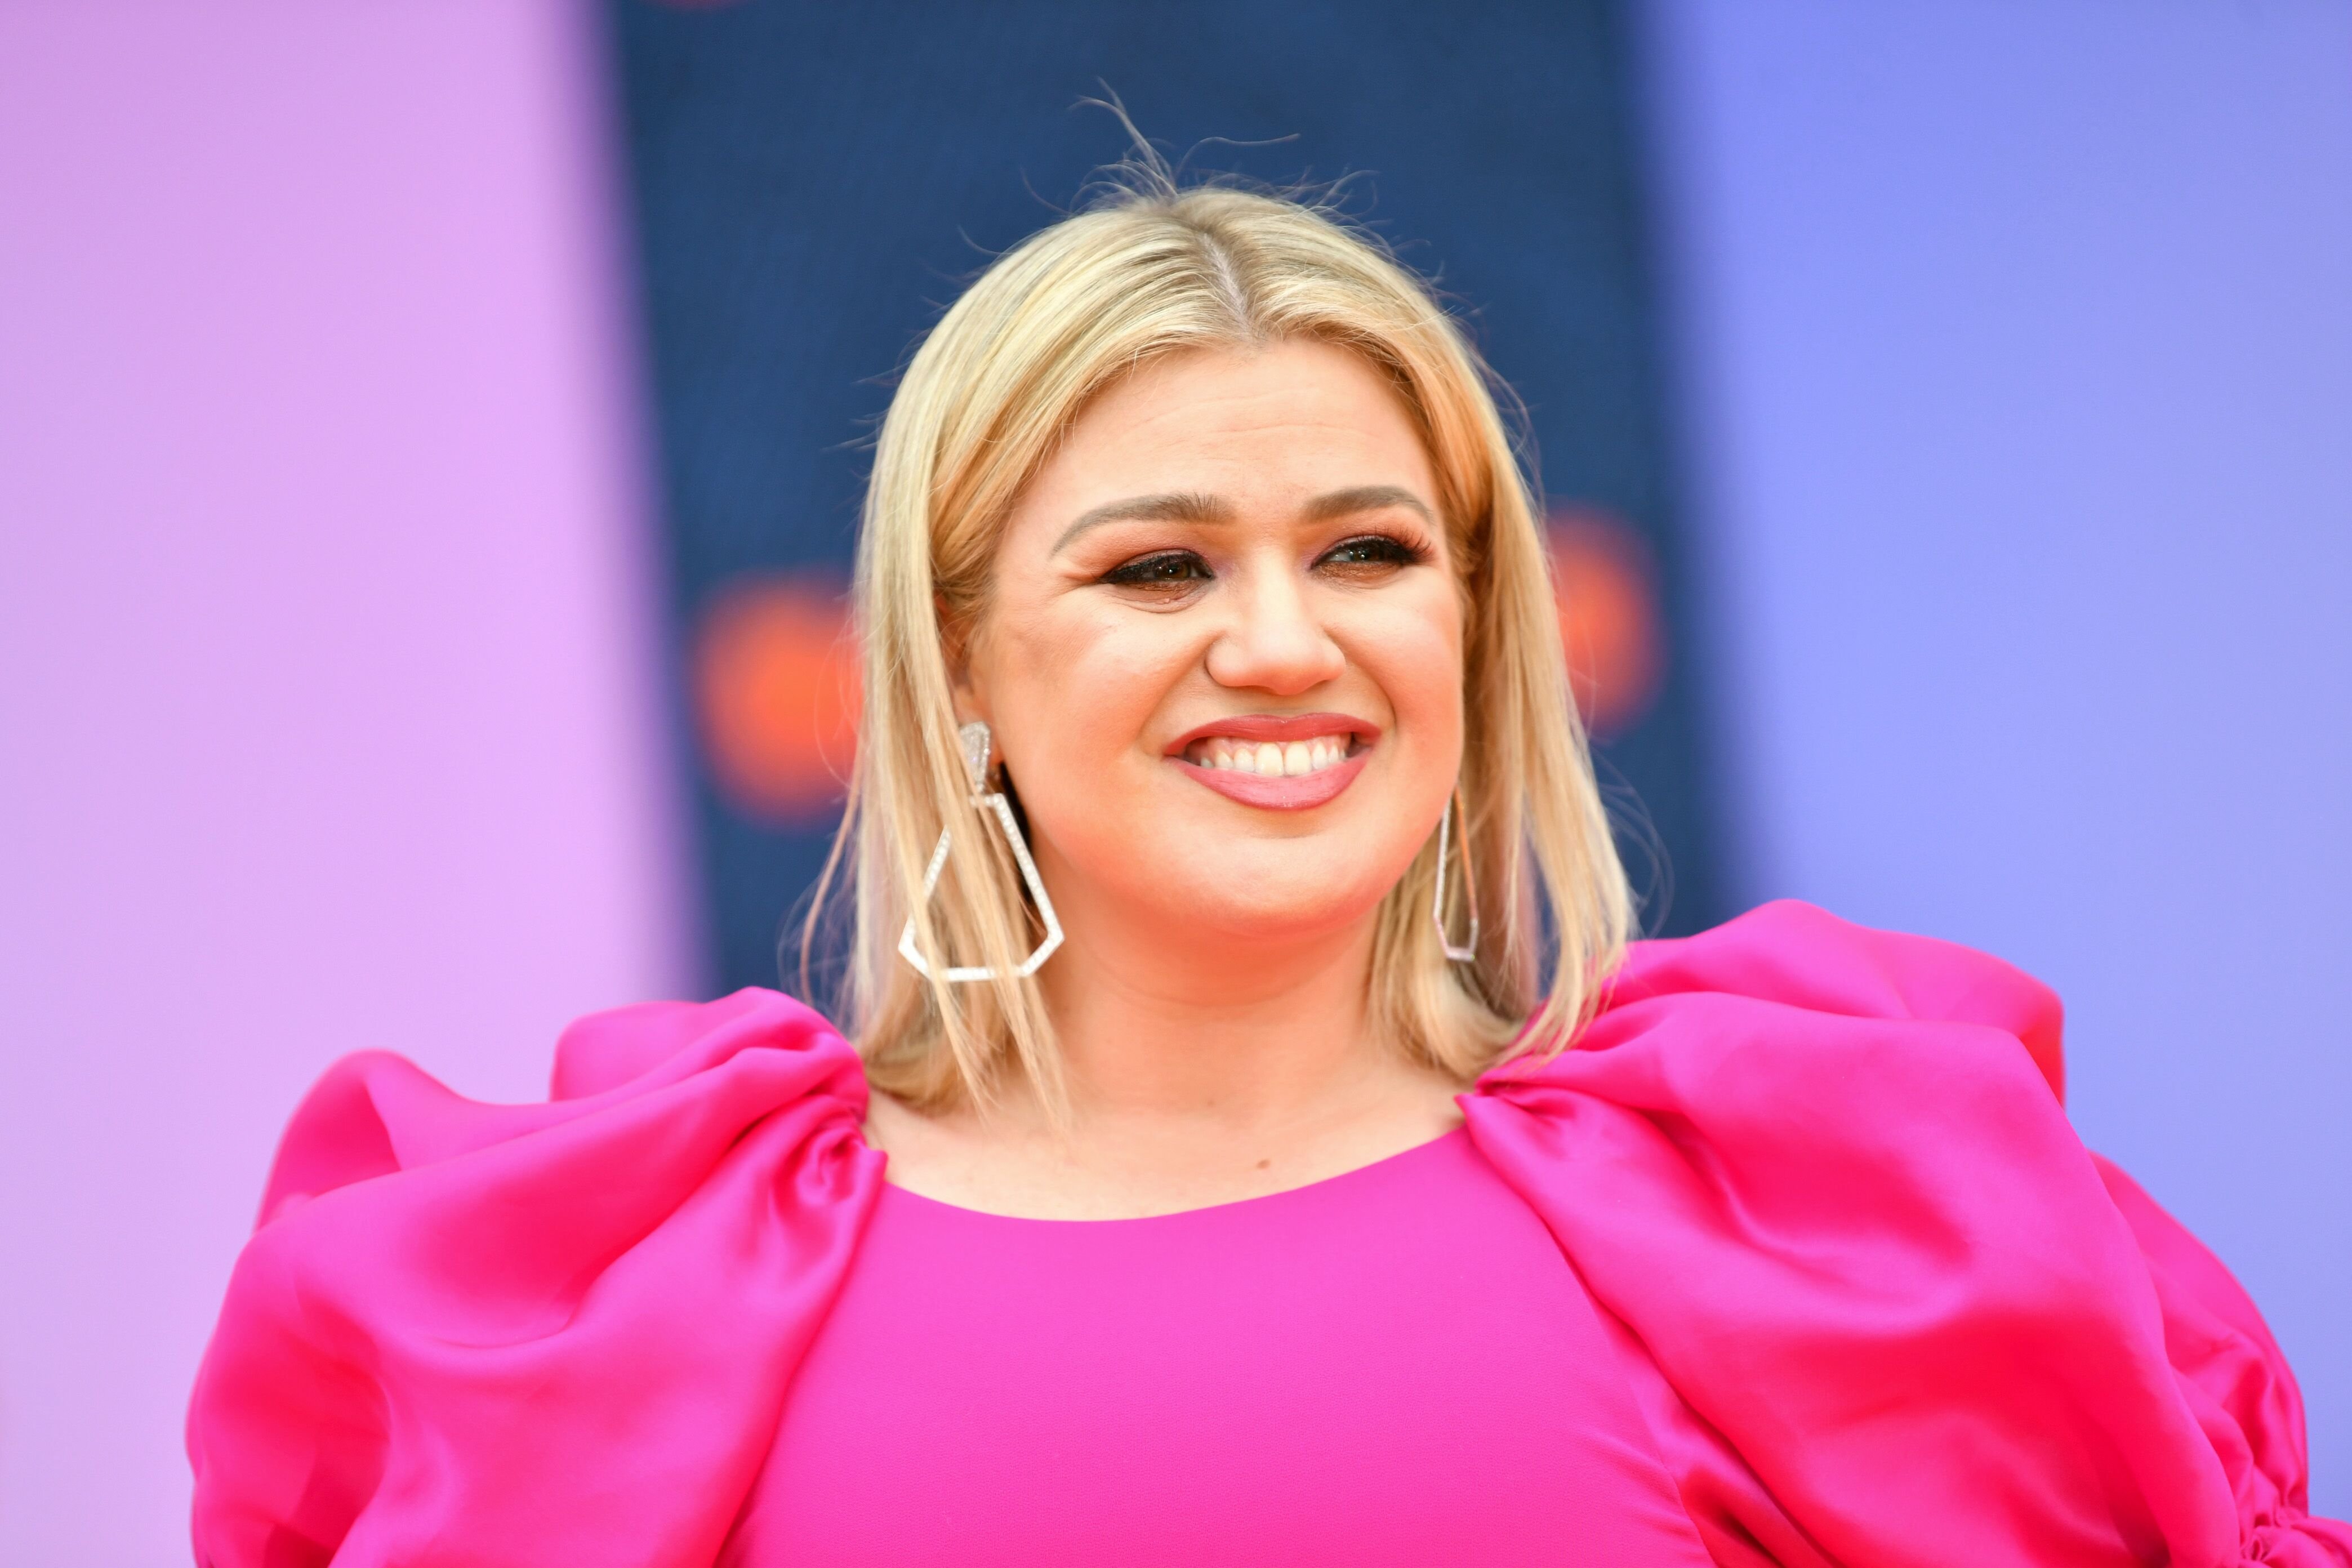 Kelly Clarkson at STX Films World Premiere of "UglyDolls" on April 27, 2019 | Photo: Getty Images